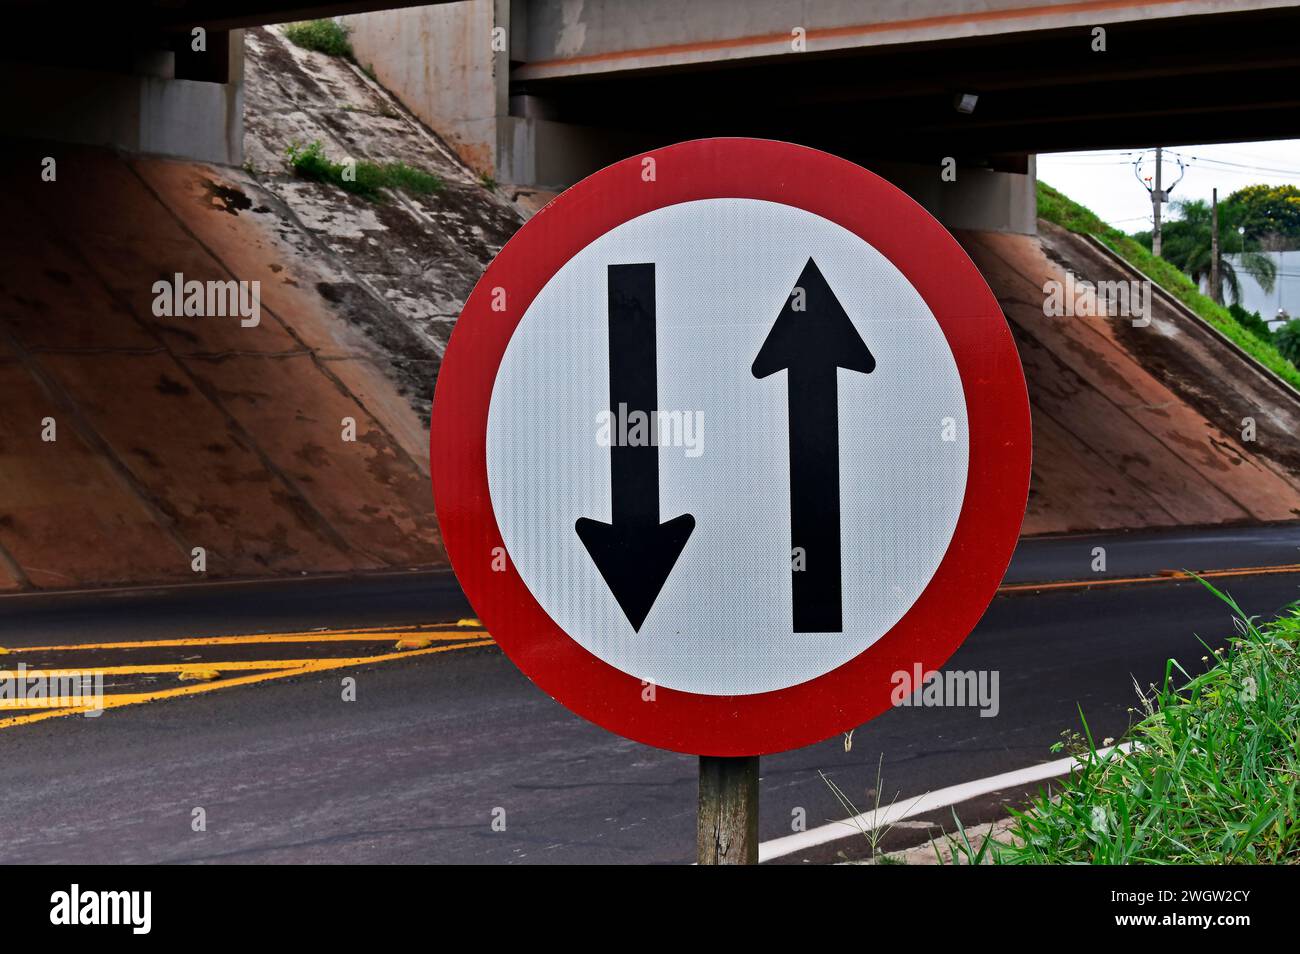 Traffic sign indicating two way Stock Photo